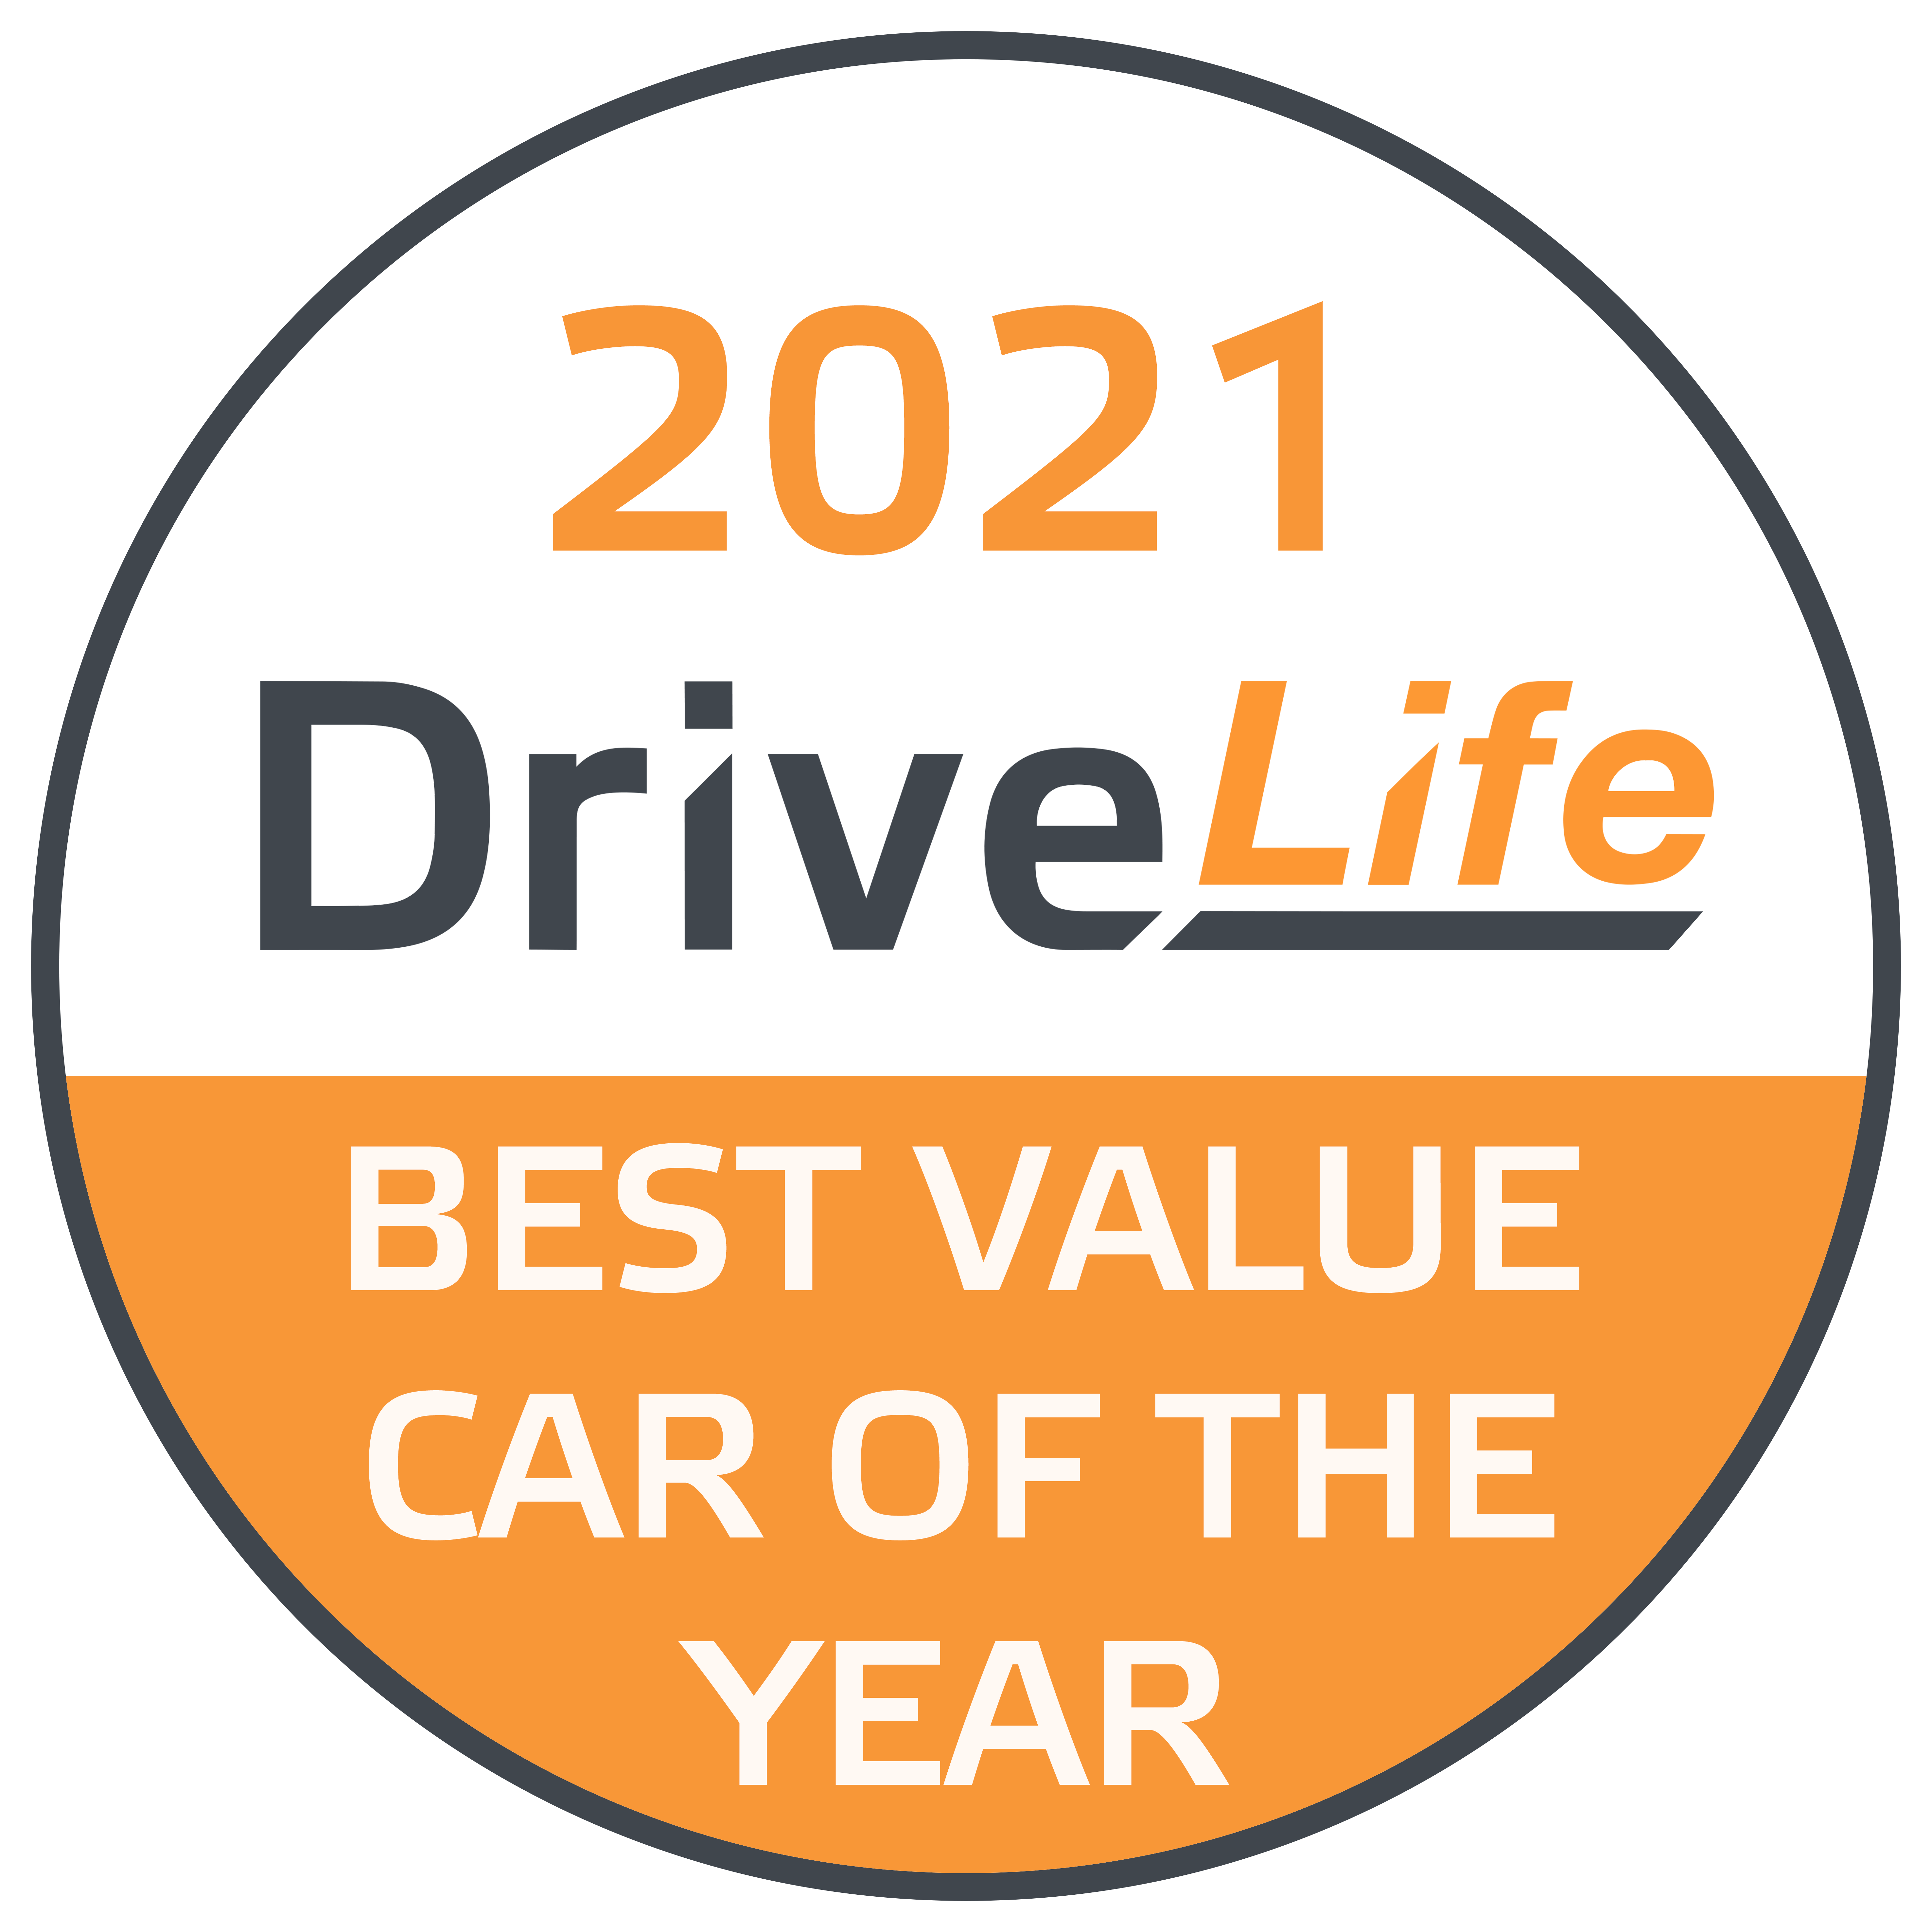 MG ZS EV WINNER of the 2021 DriveLife Car Of The Year Award